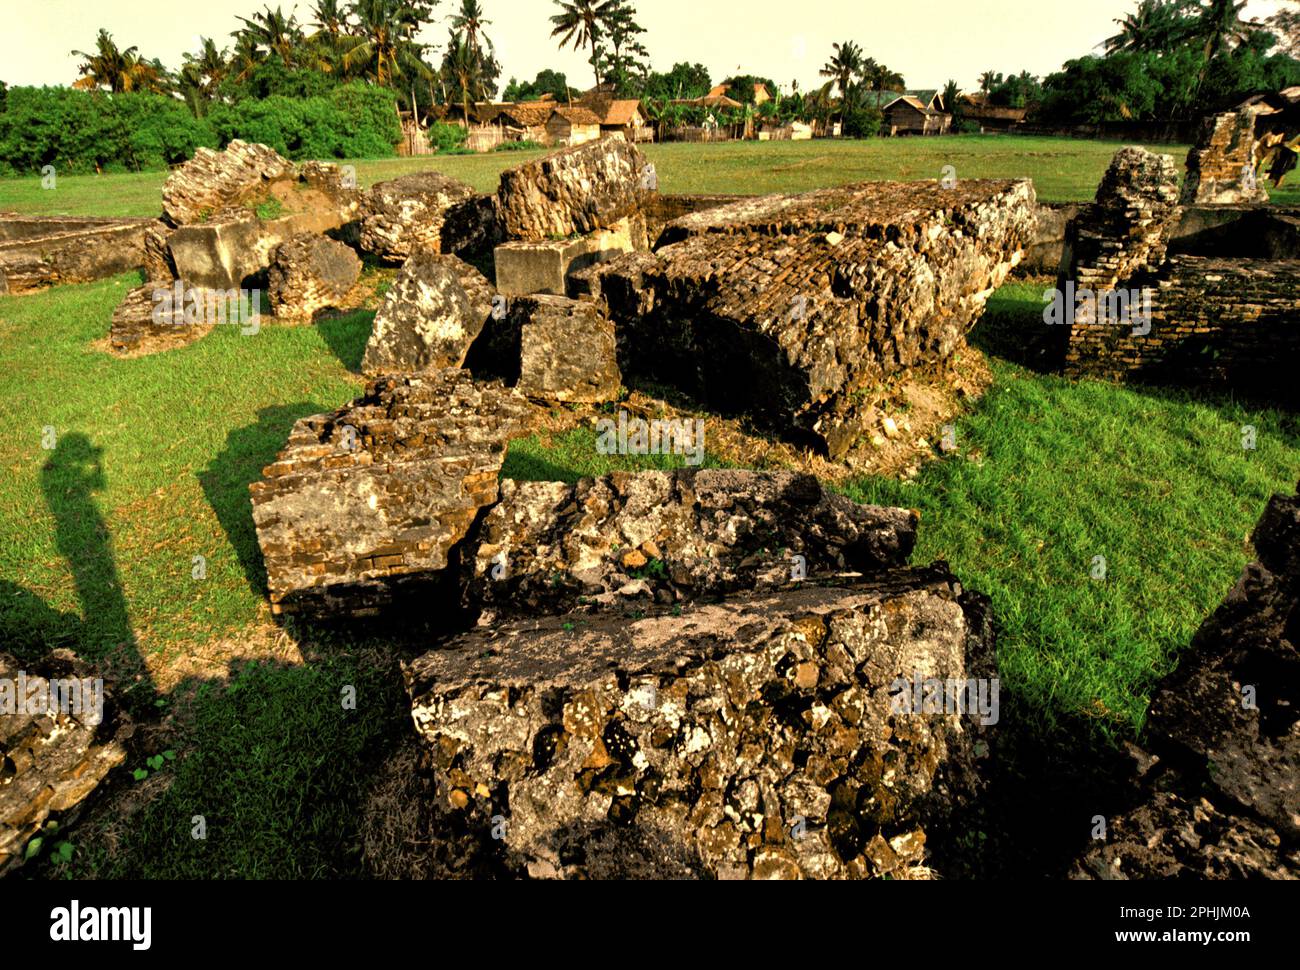 Ruins at Kaibon palace, one of the cultural heritage objects from Banten Sultanate period located in area now called Banten Lama (Old Banten) in Serang, Banten, Indonesia. 'The sustainability of cultural heritage is strongly linked to the effective participation of local communities in the conservation and management of these resources,' according to a team of scientists led by Sunday Oladipo Oladeji in their research article published on Sage Journals on October 28, 2022. Banten Lama (Old Banten) area was a part of the important port of Banten Sultanate, especially during the reign of... Stock Photo